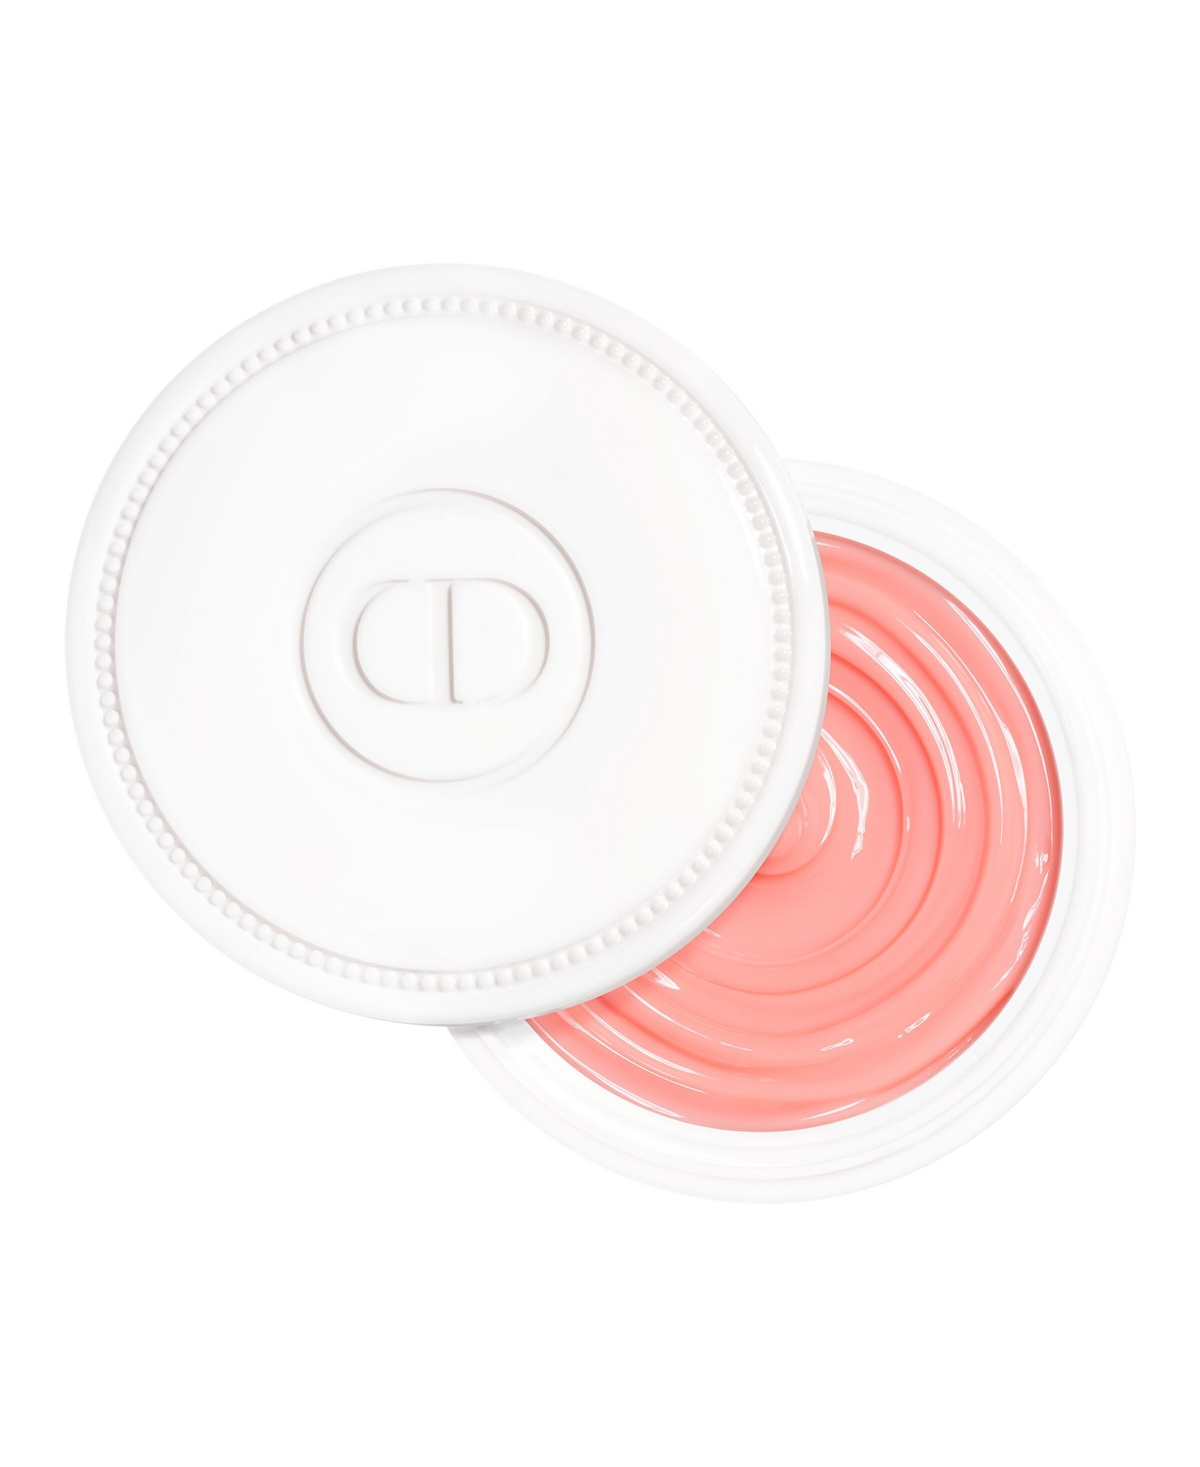 Dior Creme Abricot Strengthening Nail Care In No Color